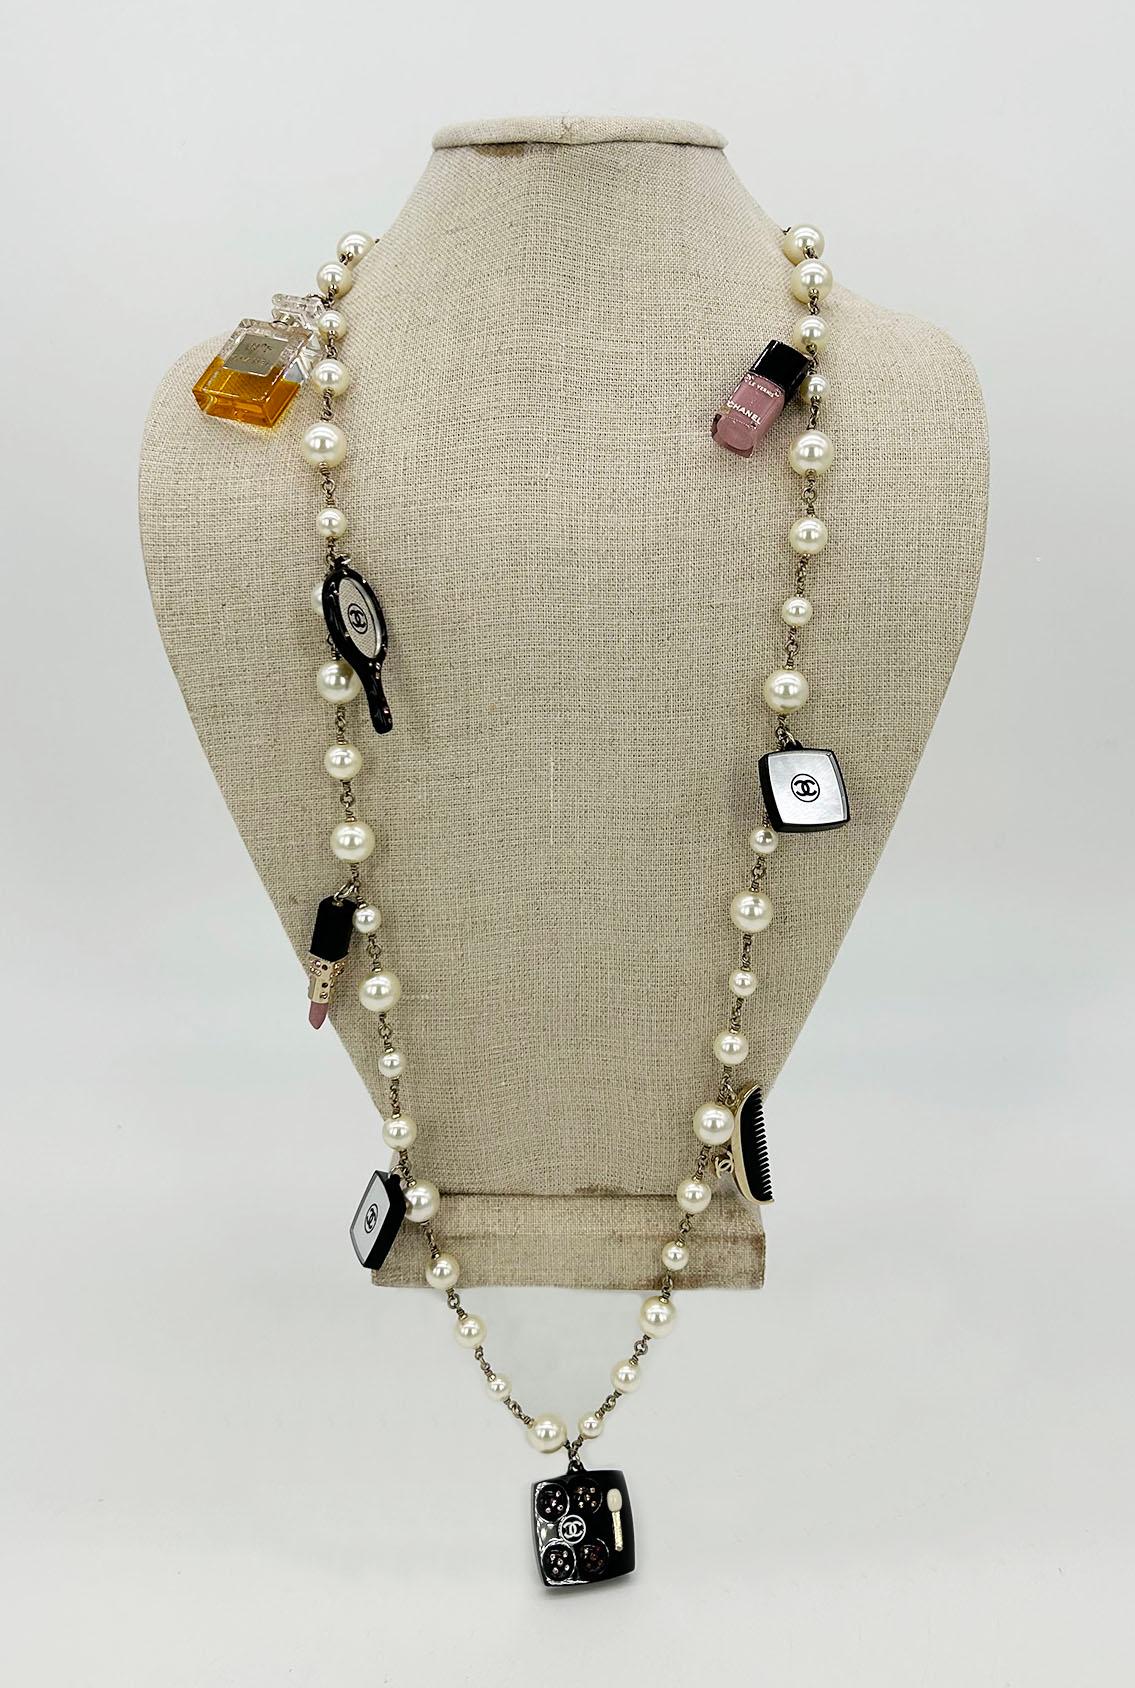 Chanel Vintage Make Up Charm Beaded Pearl Chain Necklace For Sale 4